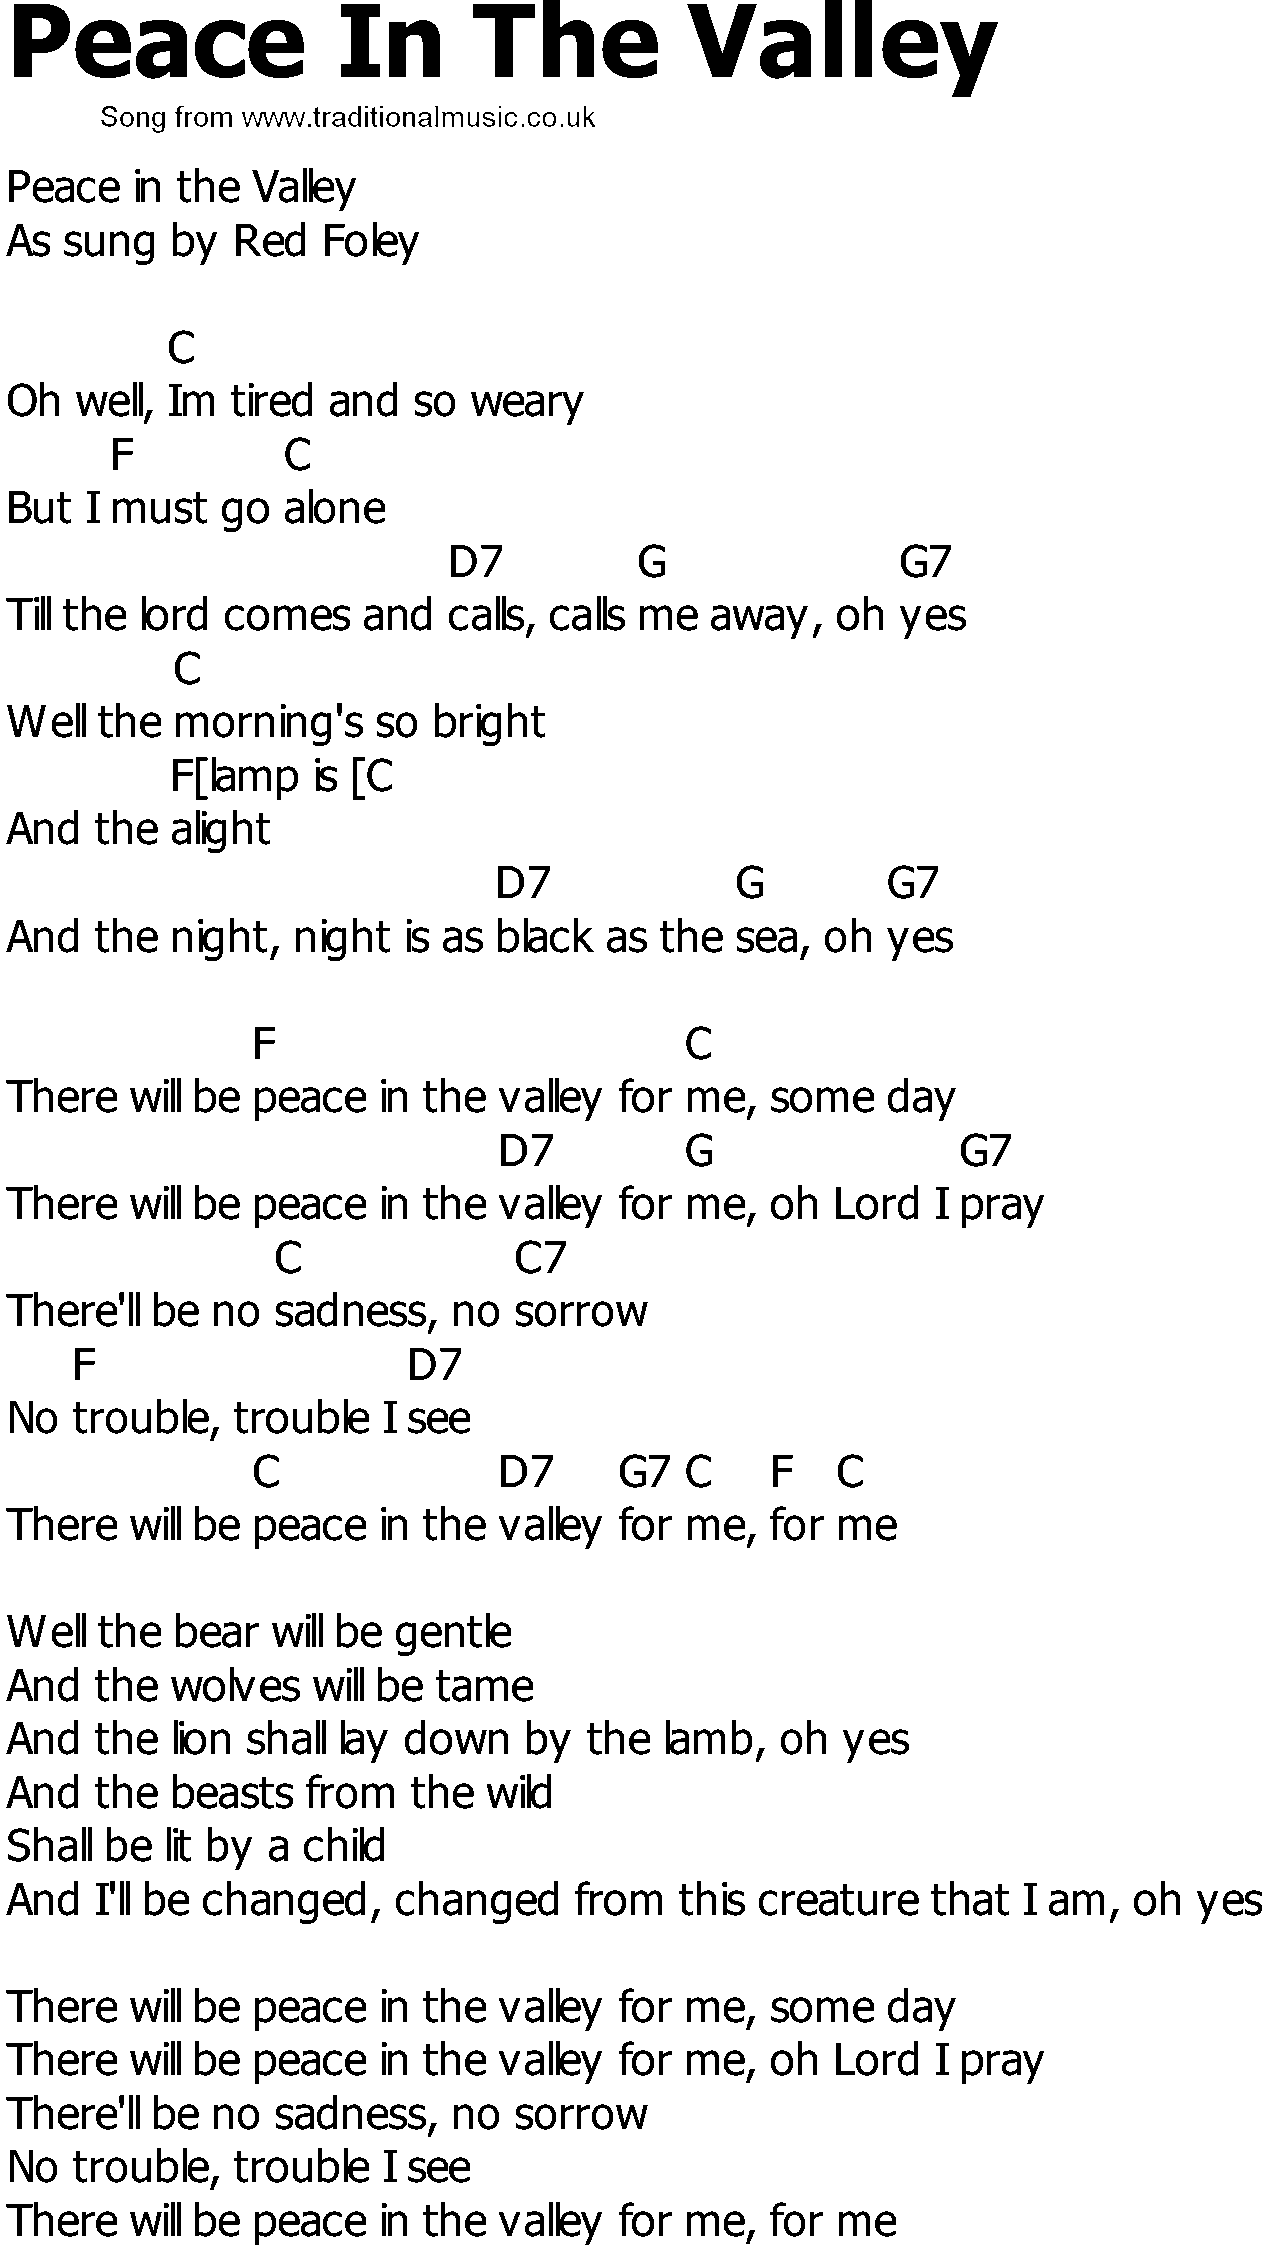 Old Country song lyrics with chords - Peace In The Valley